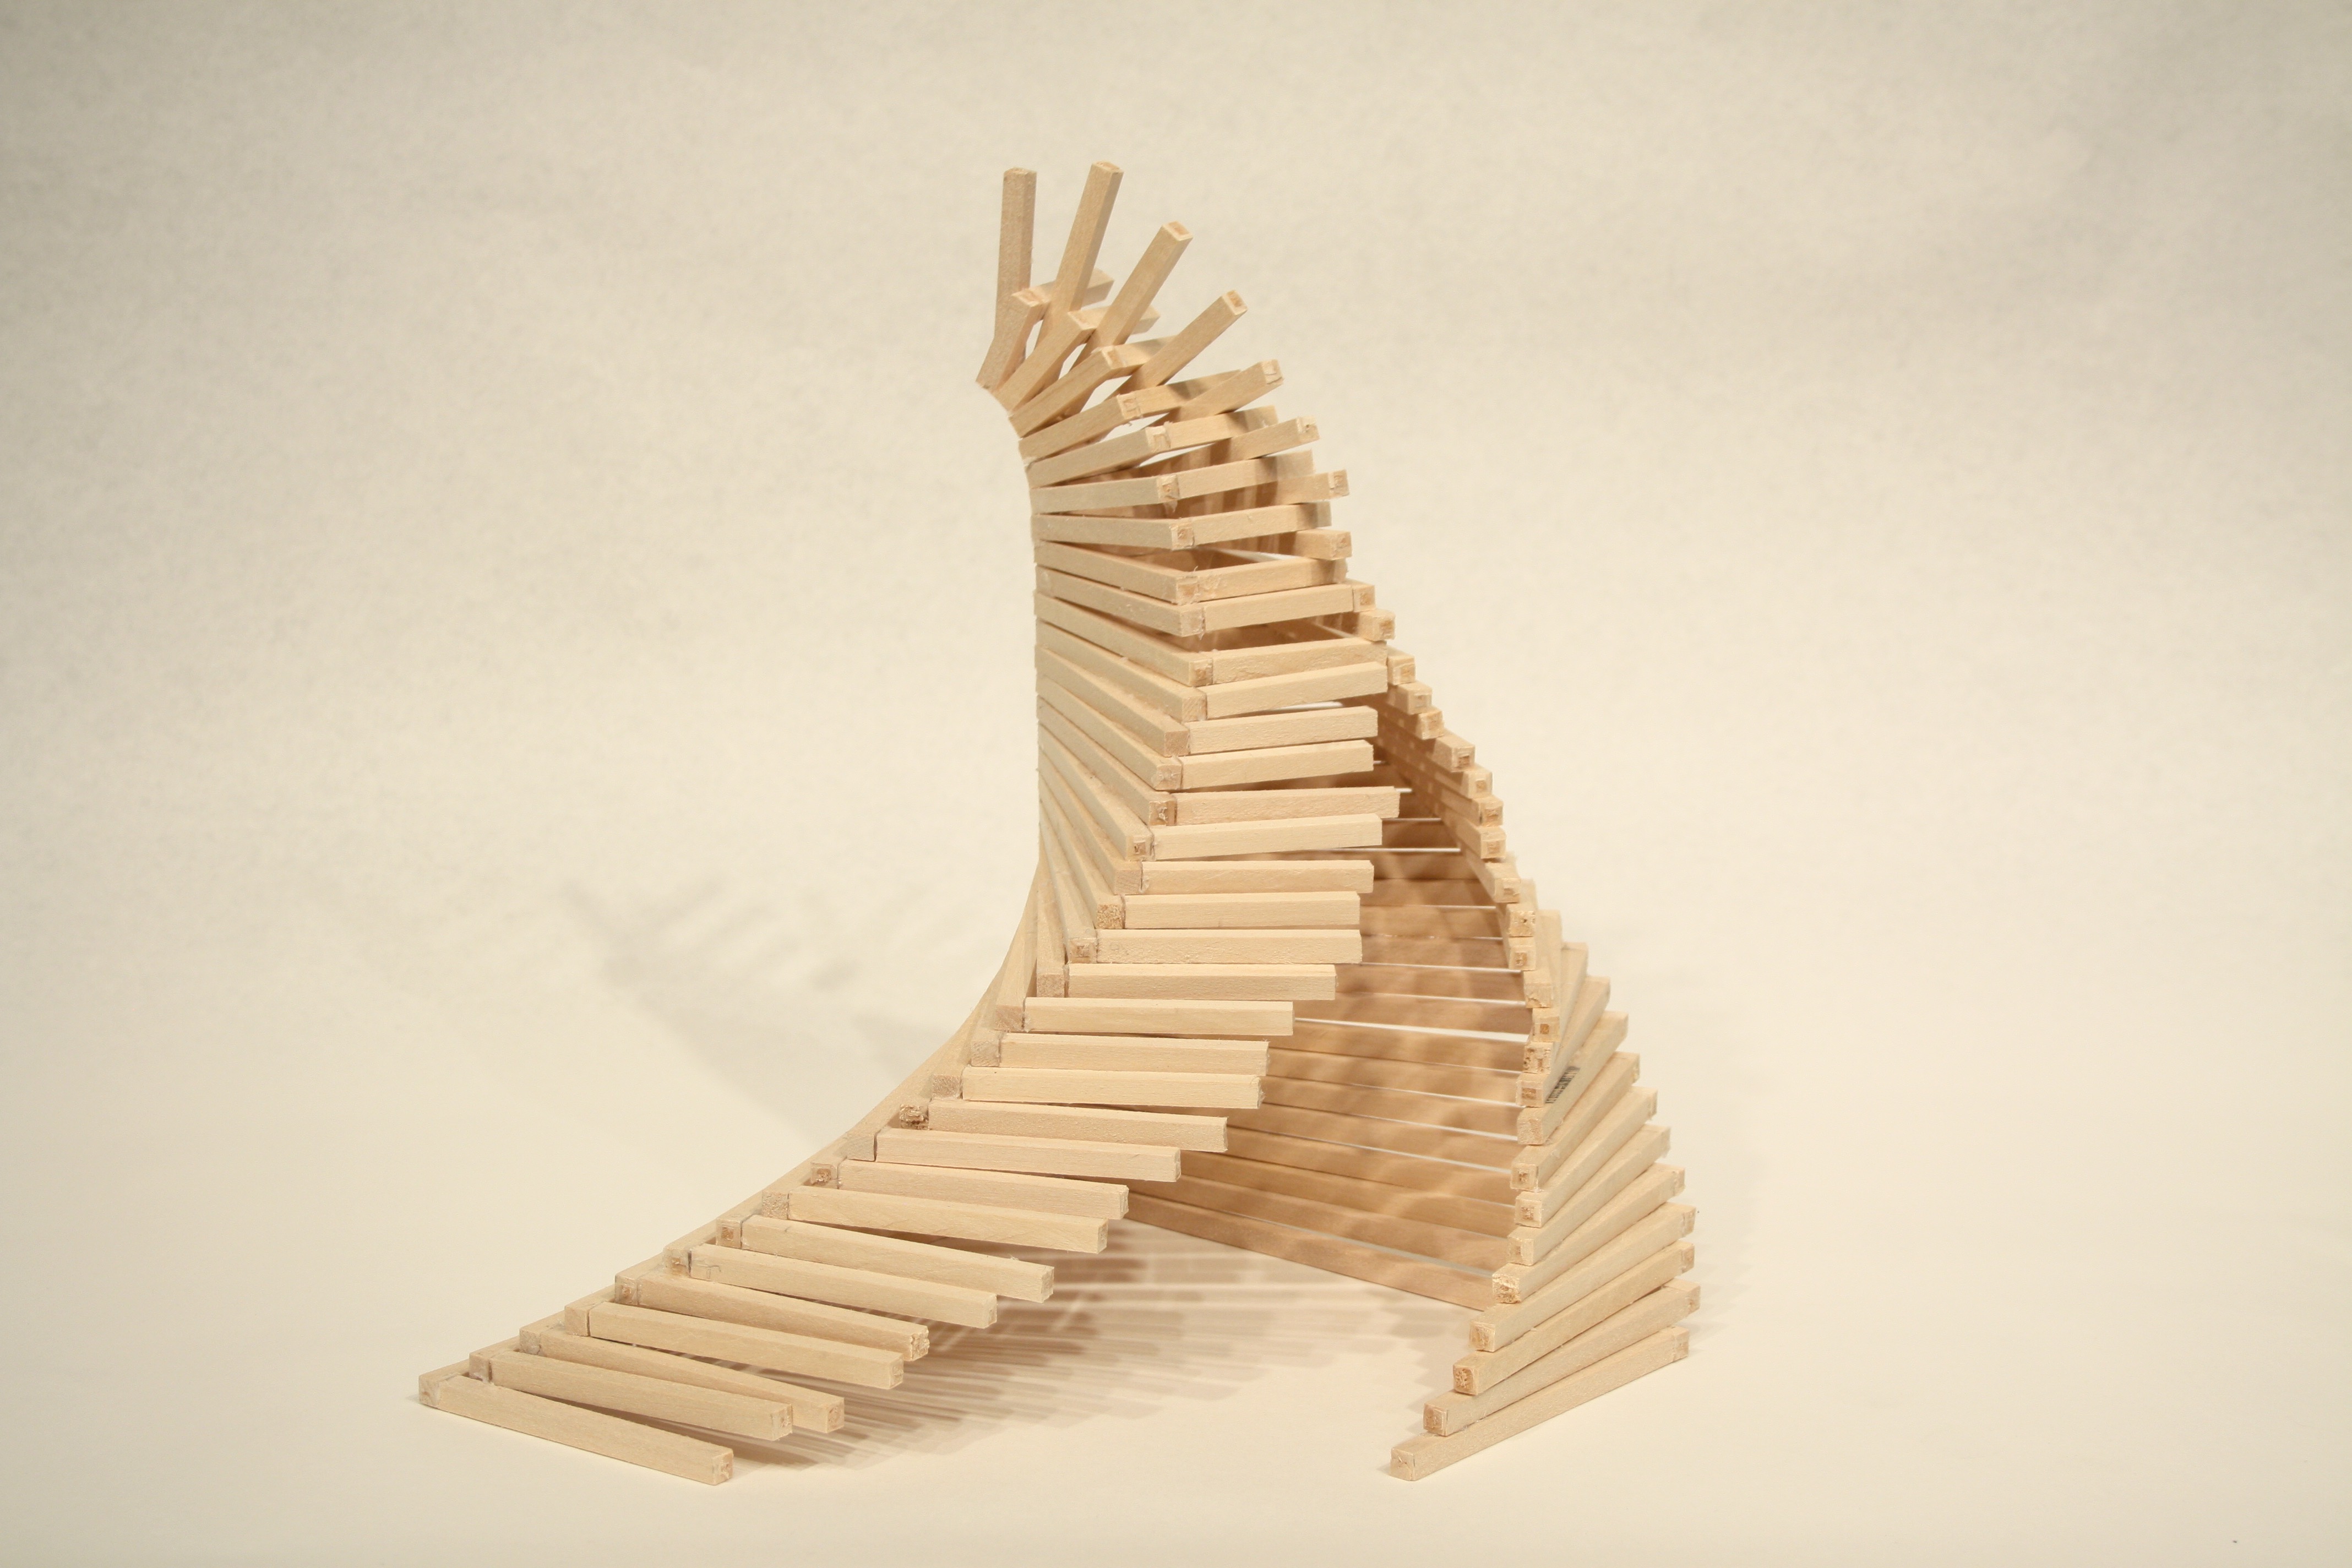 Wooden sticks piled together to form a curving tower with a split opening.